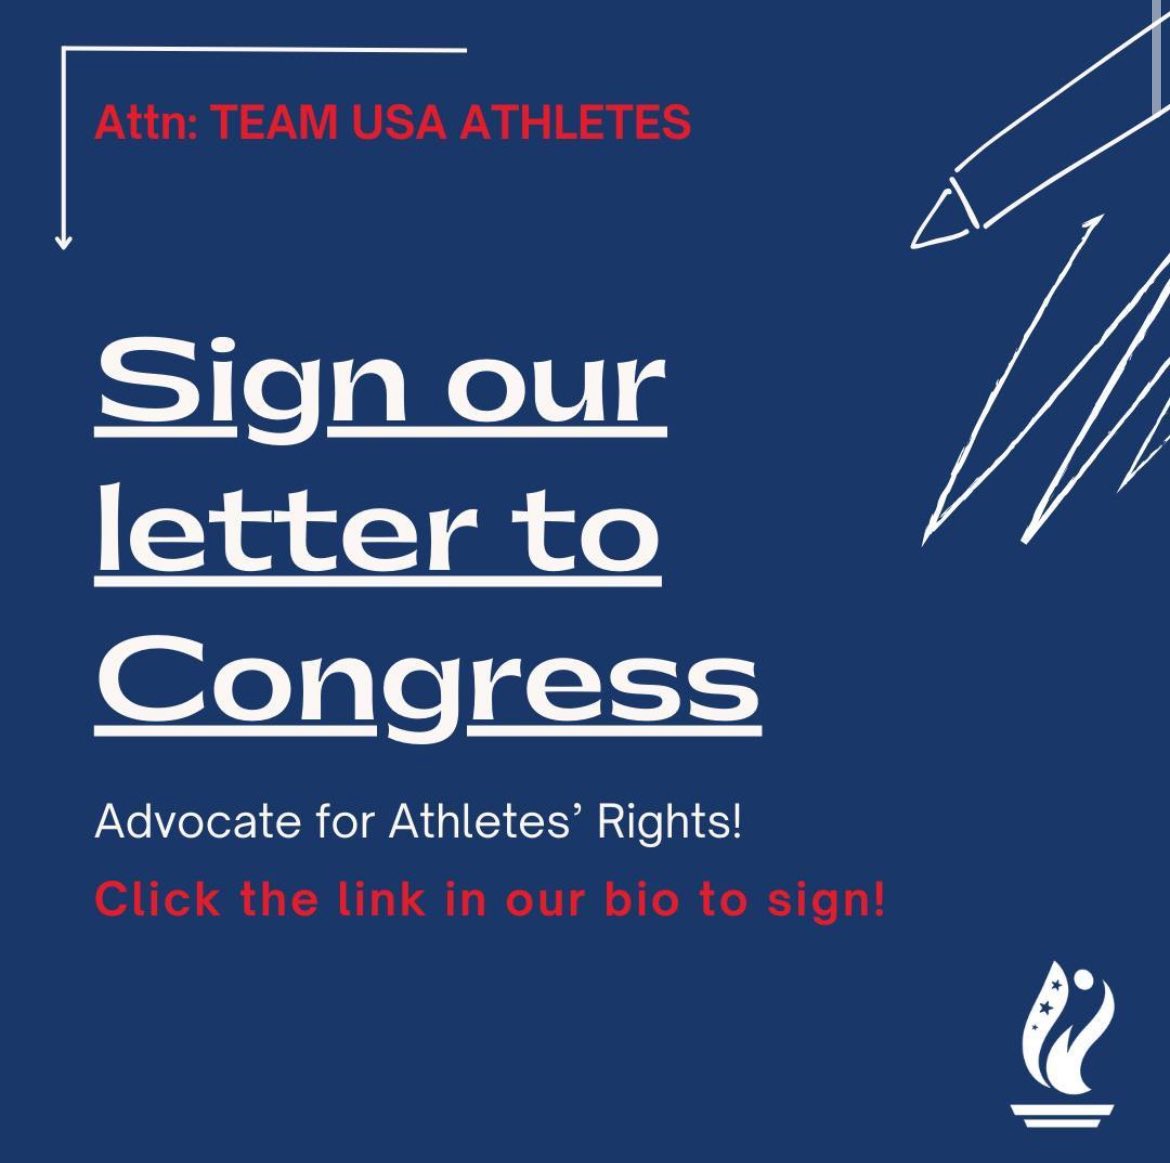 Team USA Call to Action!⏰We're on a mission to amend the Ted Stevens Act to gain independence, but we can't do it alone. Your voice matters. Sign our letter to Congress and advocate for athletes' rights!📃 linktr.ee/TeamUSAAC?fbcl…

#ActNow #ChangeMakers #AthleteVoice